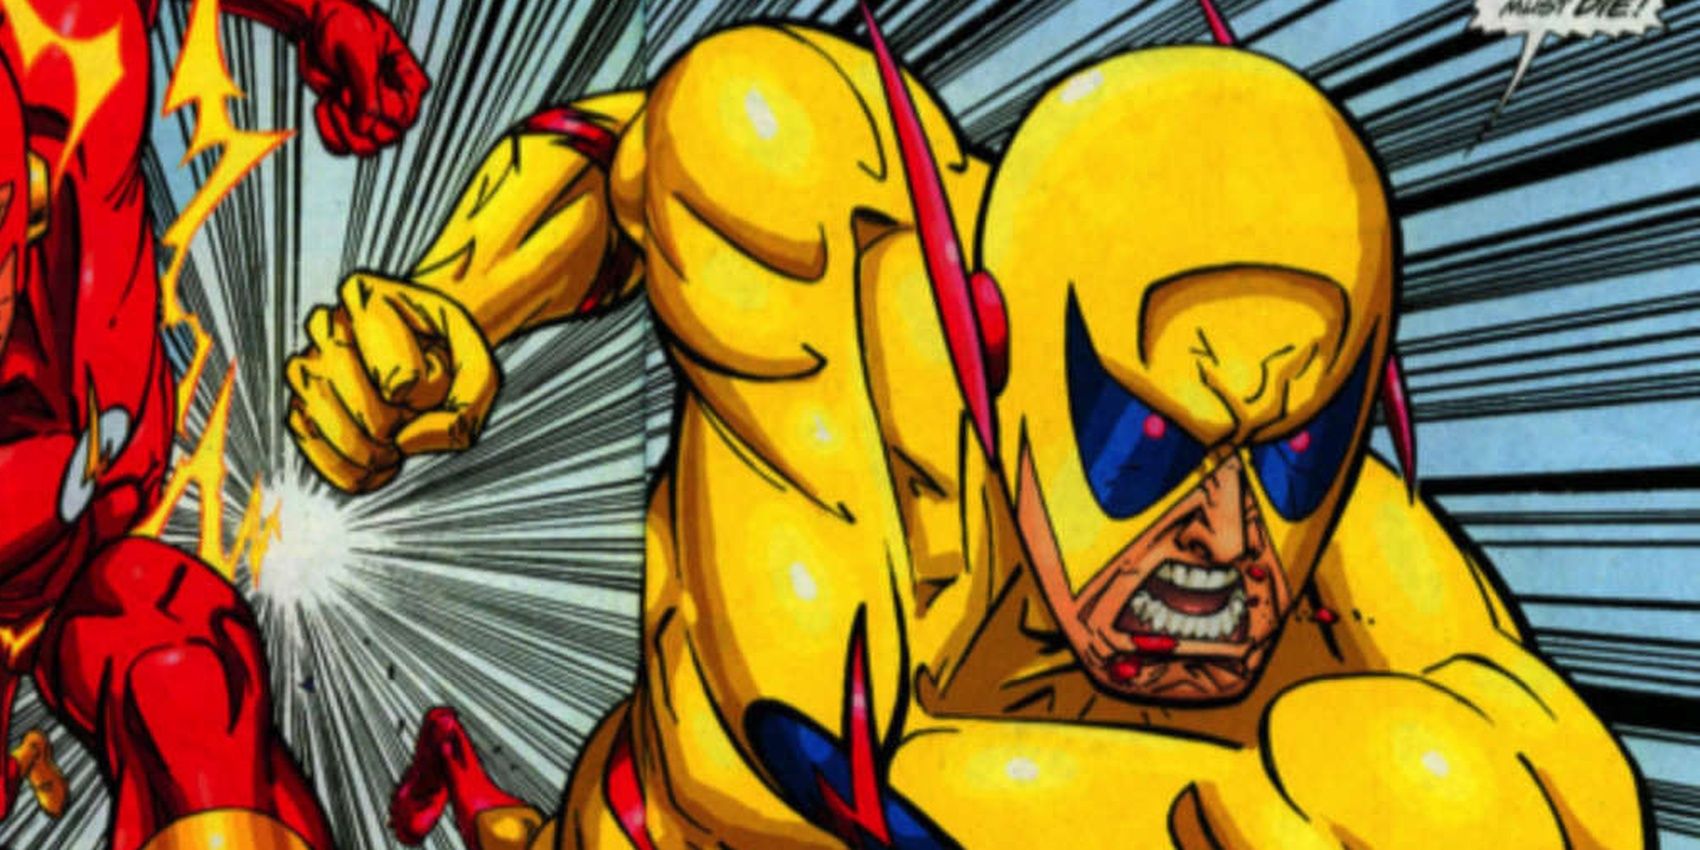 Zoom races the Flash in DC Comics